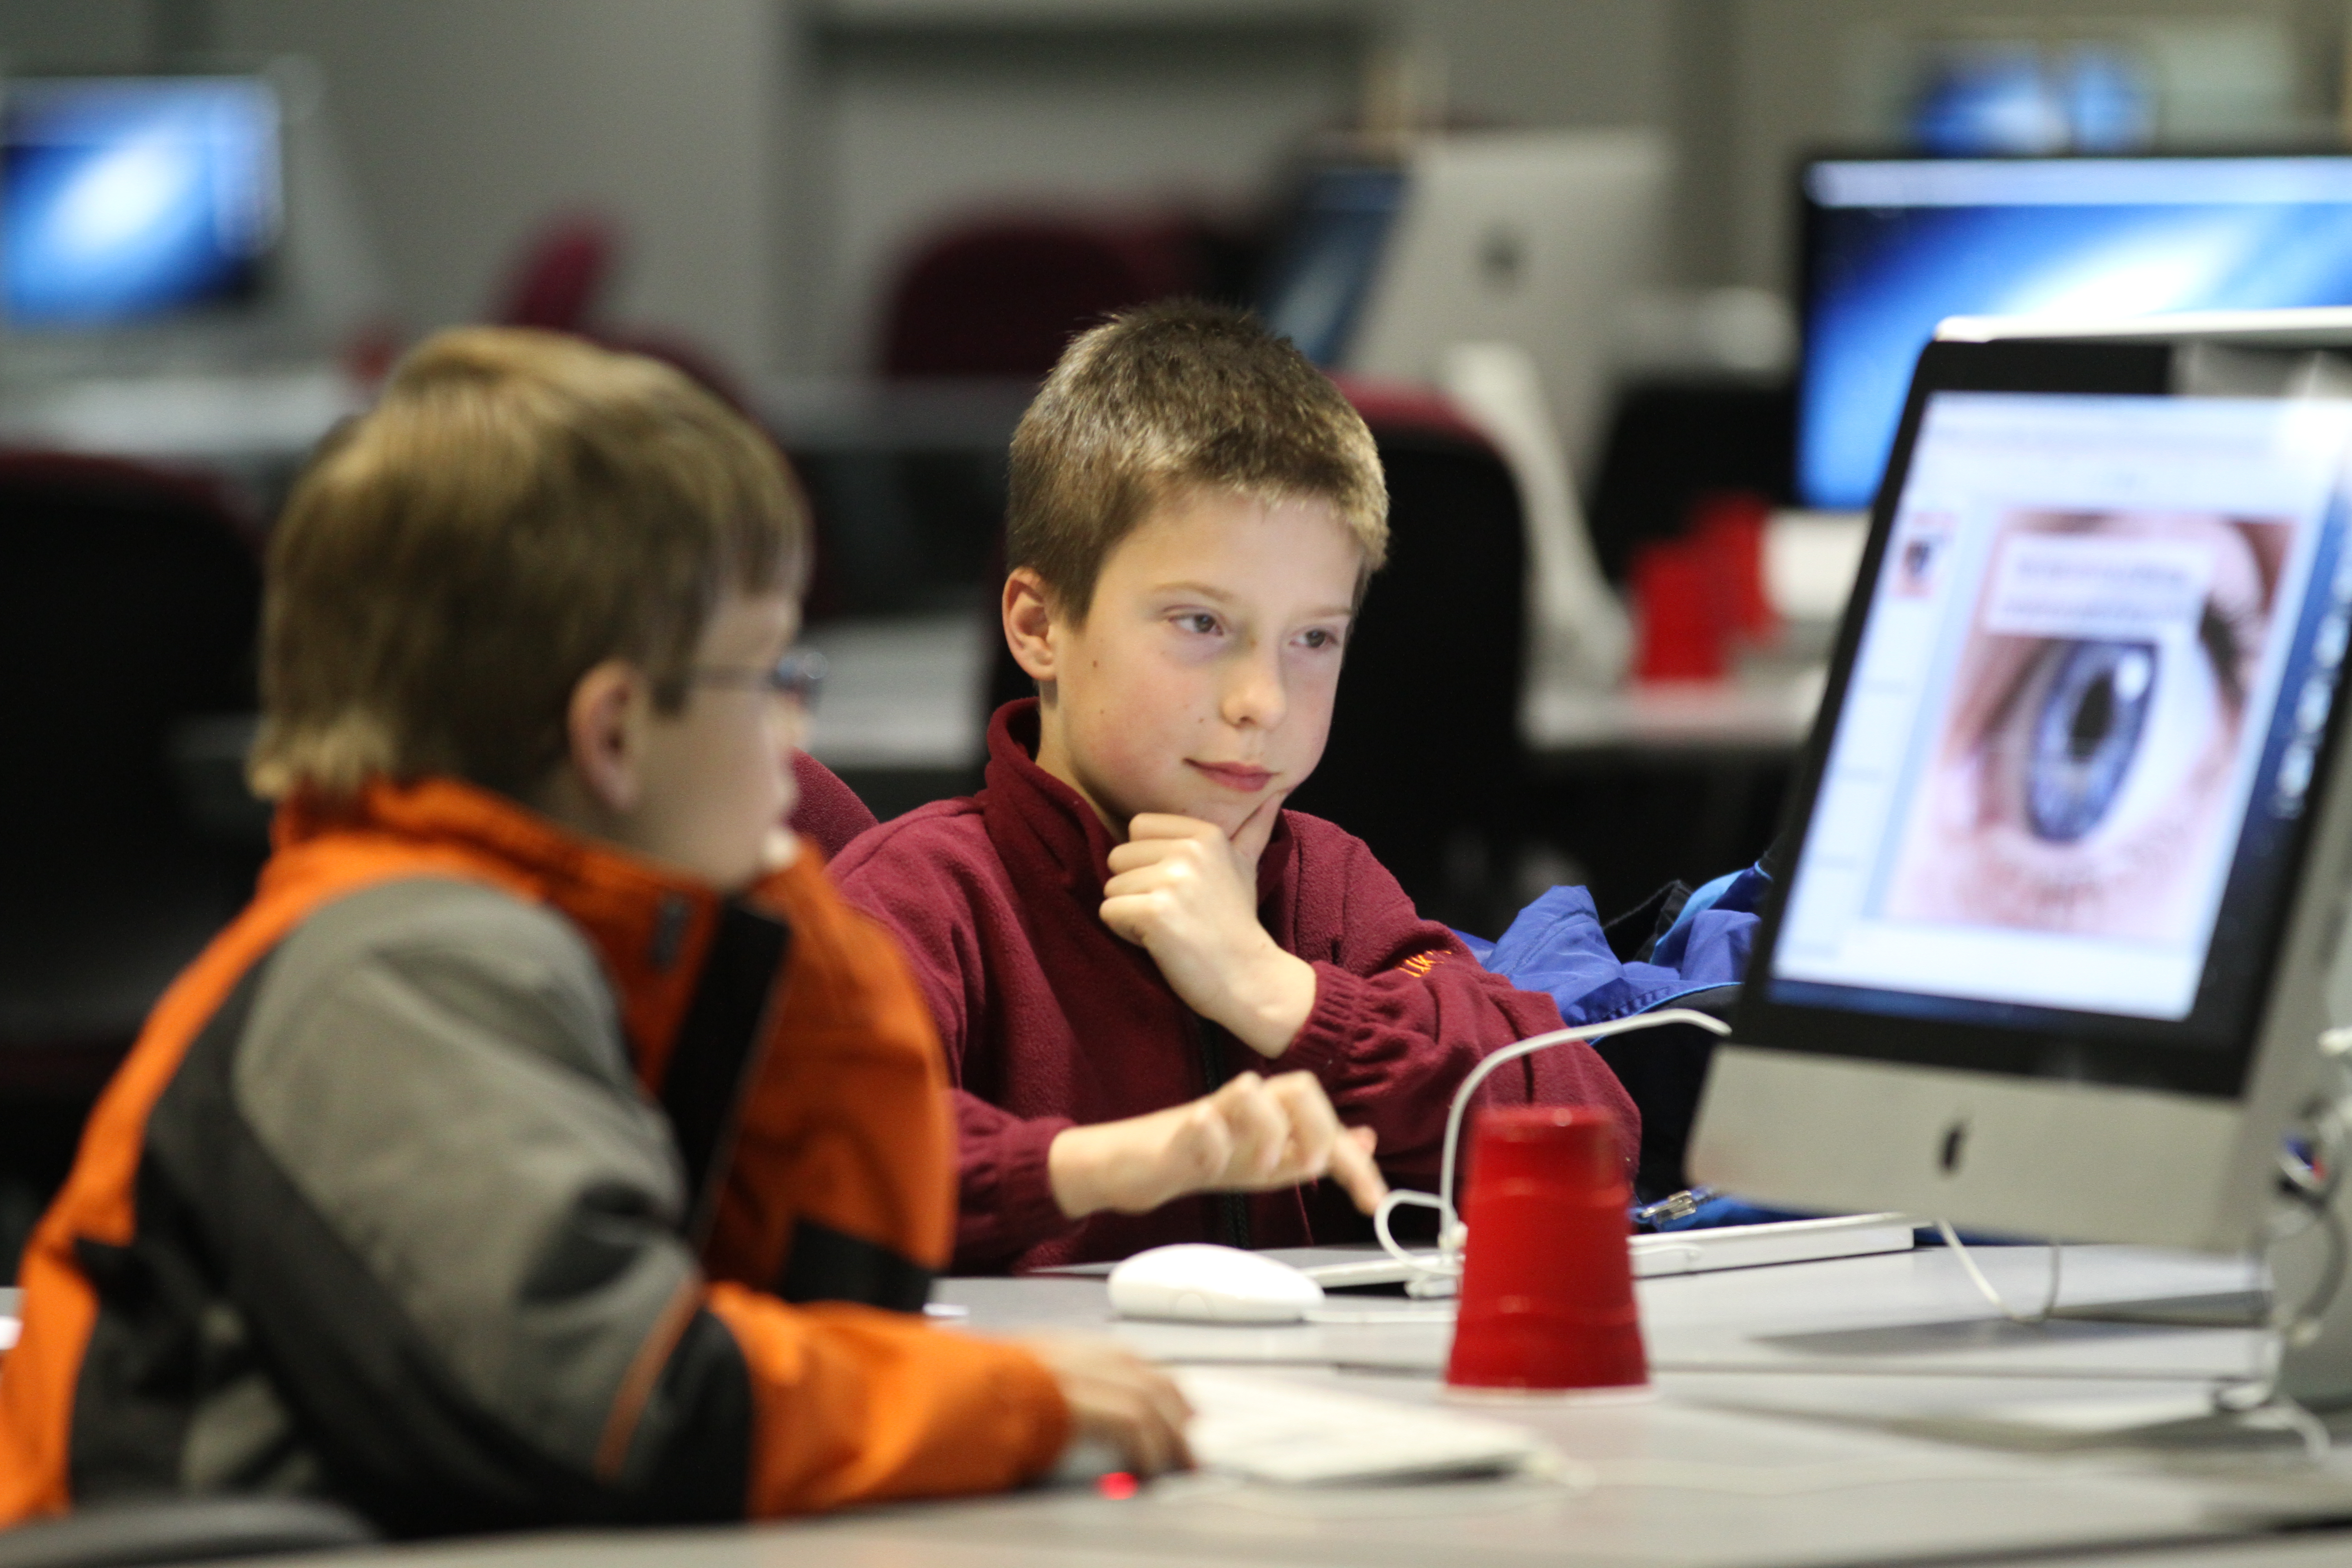 Kids' Tech University participants will use online activities to build on key concepts they encounter throughout the program.